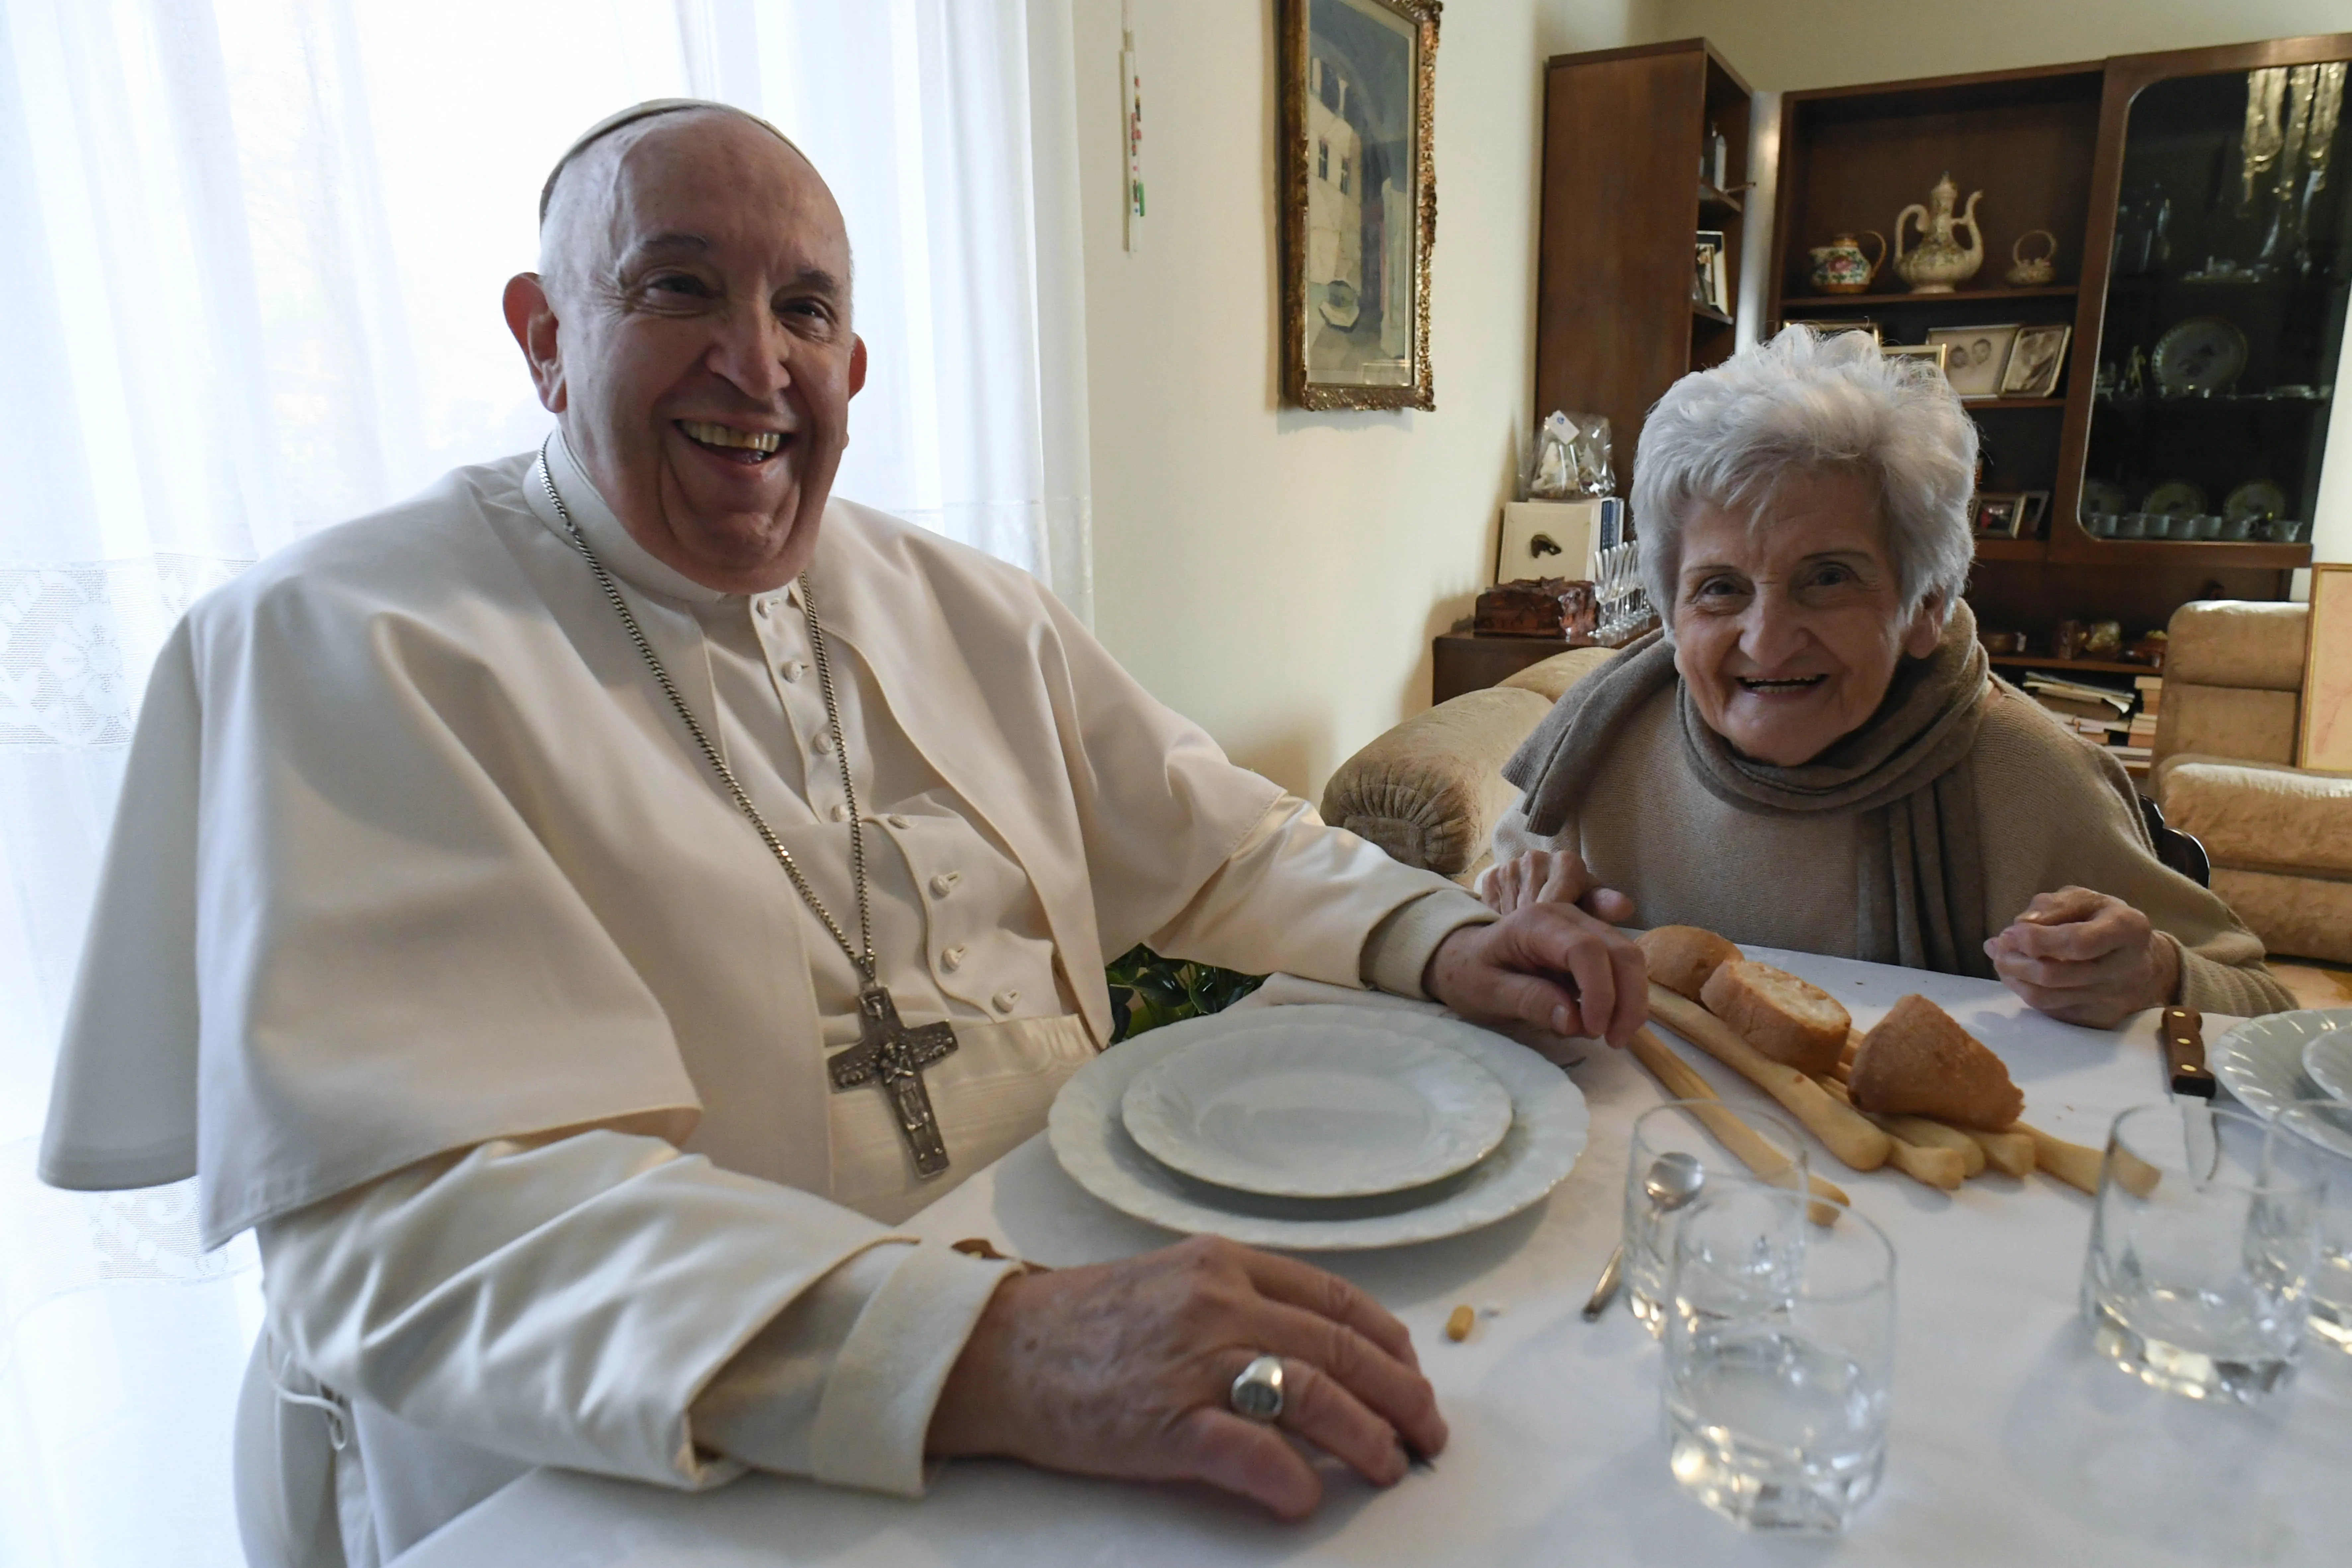 Pope Francis has lunch with his second cousin Carla Rabezzana at her home in Portacomaro, Italy on Nov. 19, 2022.?w=200&h=150